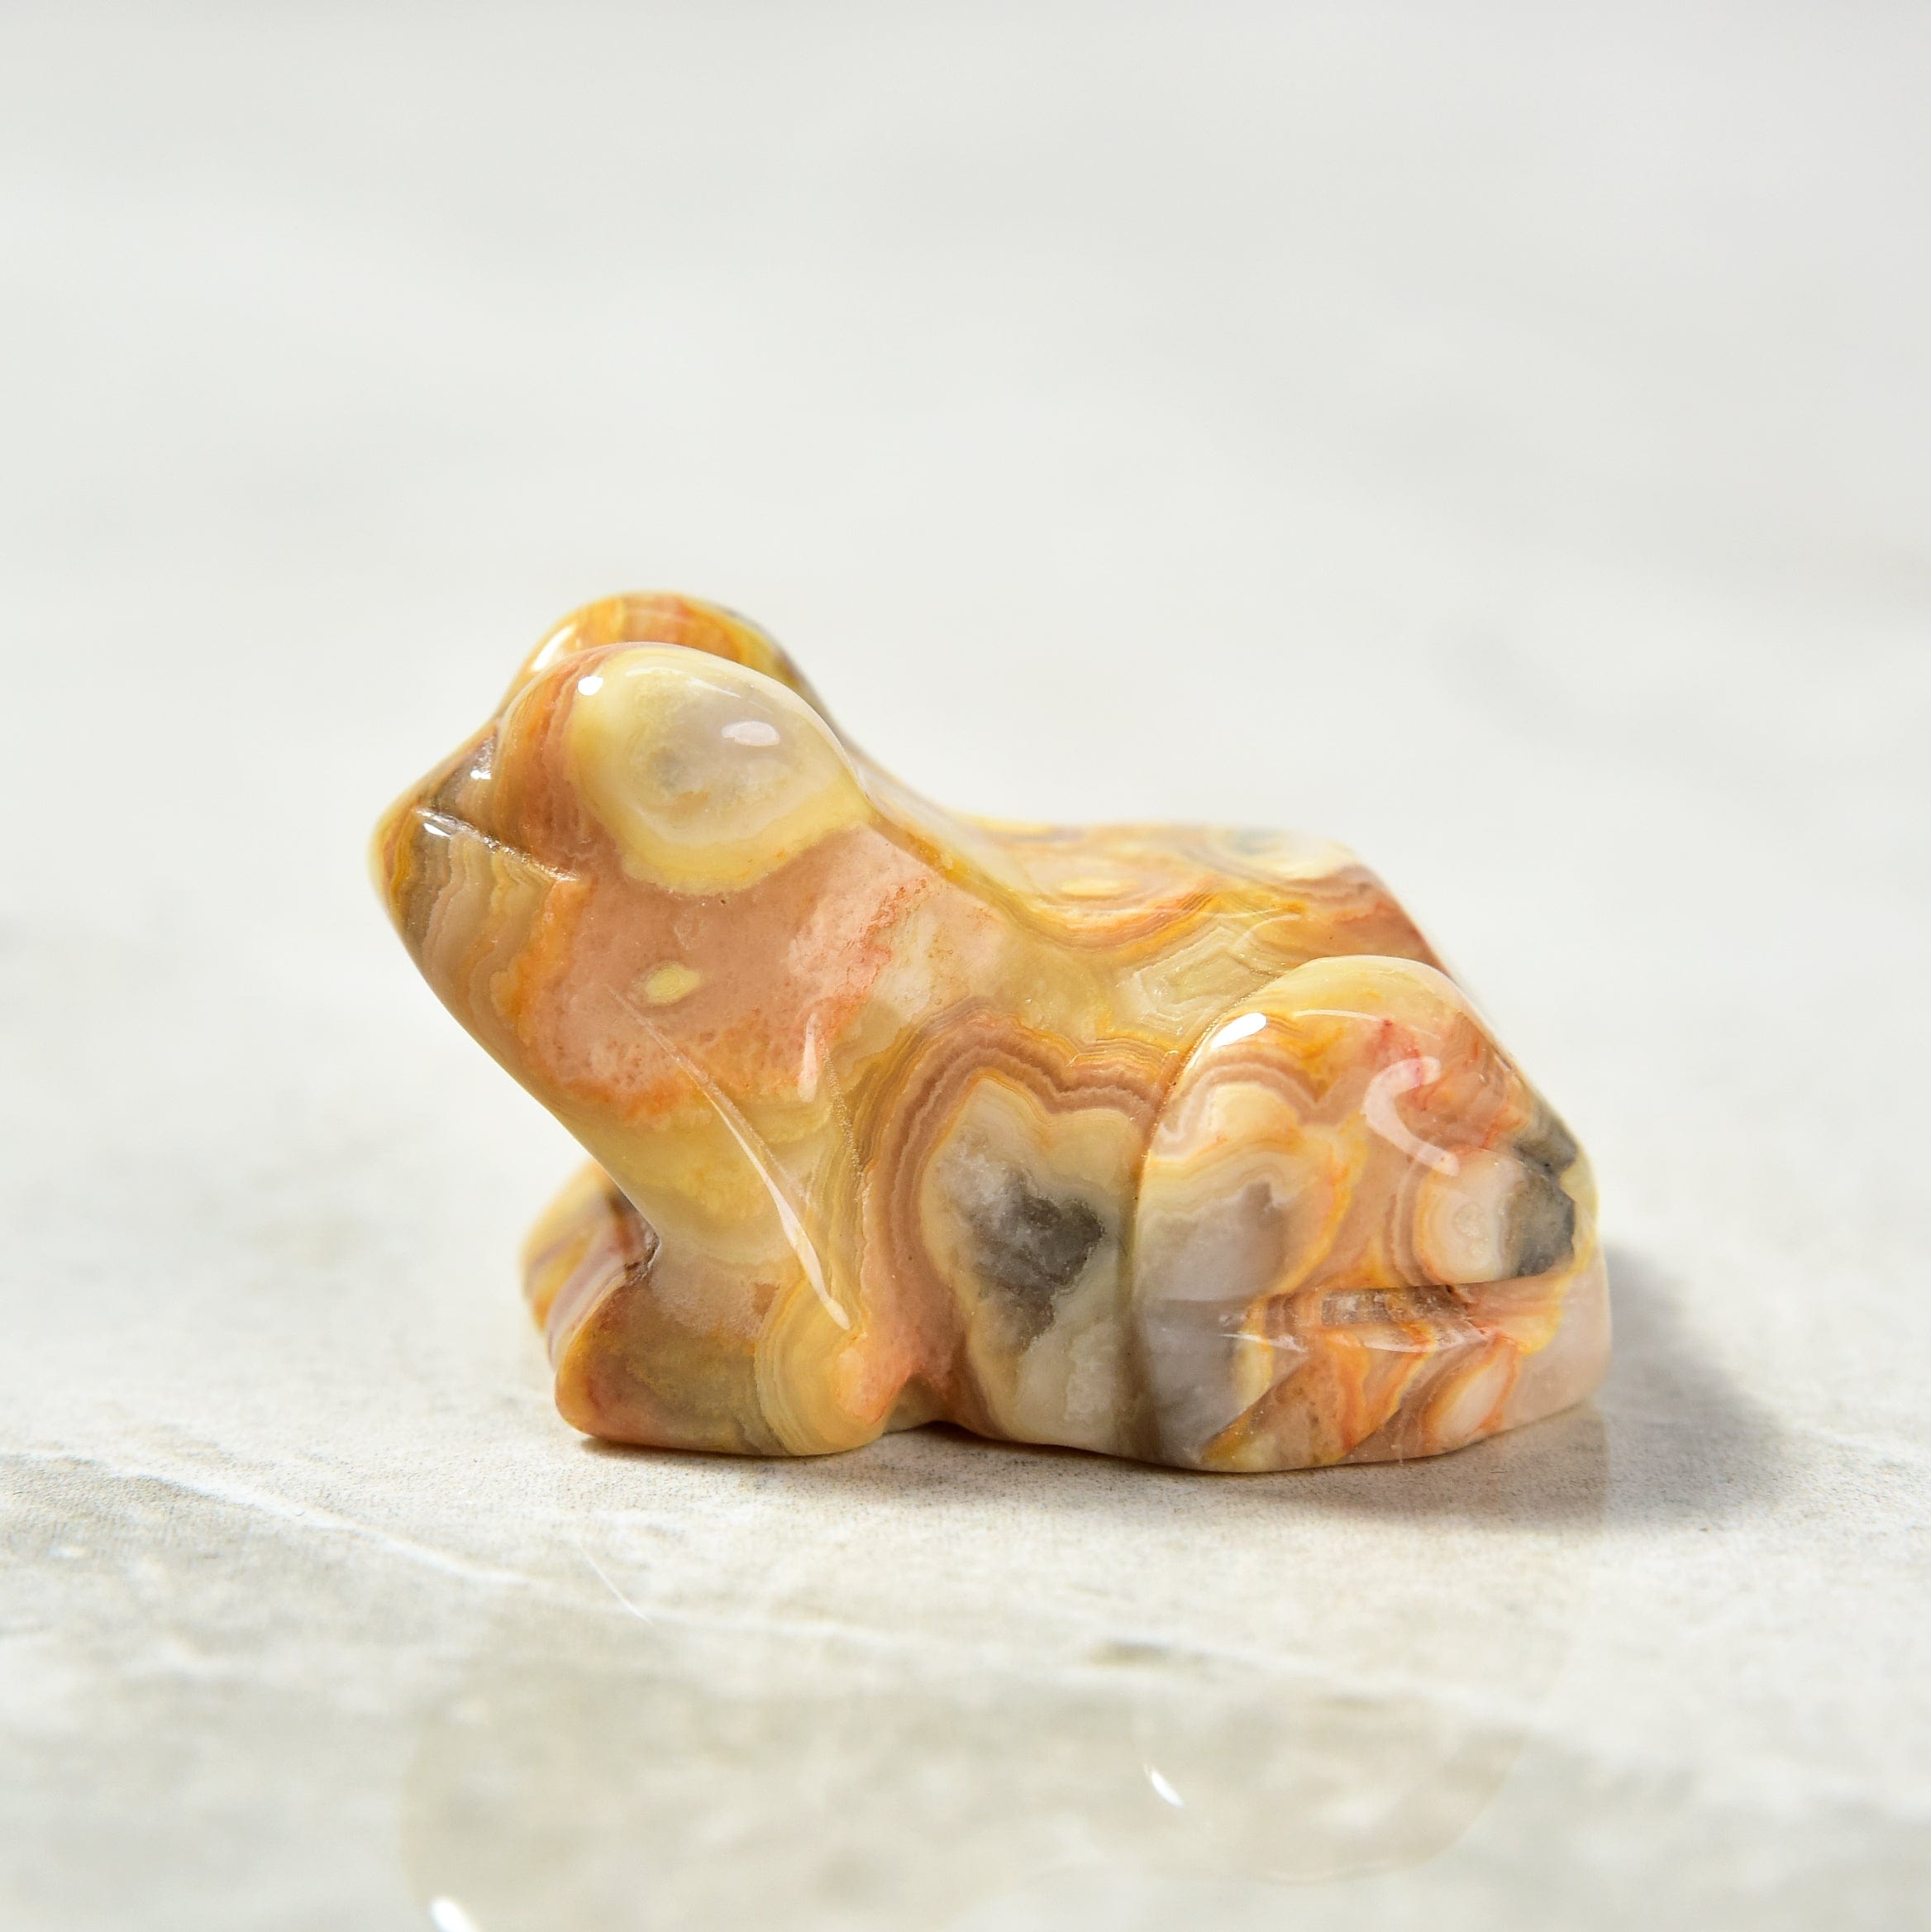 KALIFANO Gemstone Carvings 1.5" Crazy Lace Agate Frog Natural Gemstone Carving CV9-F-CLA